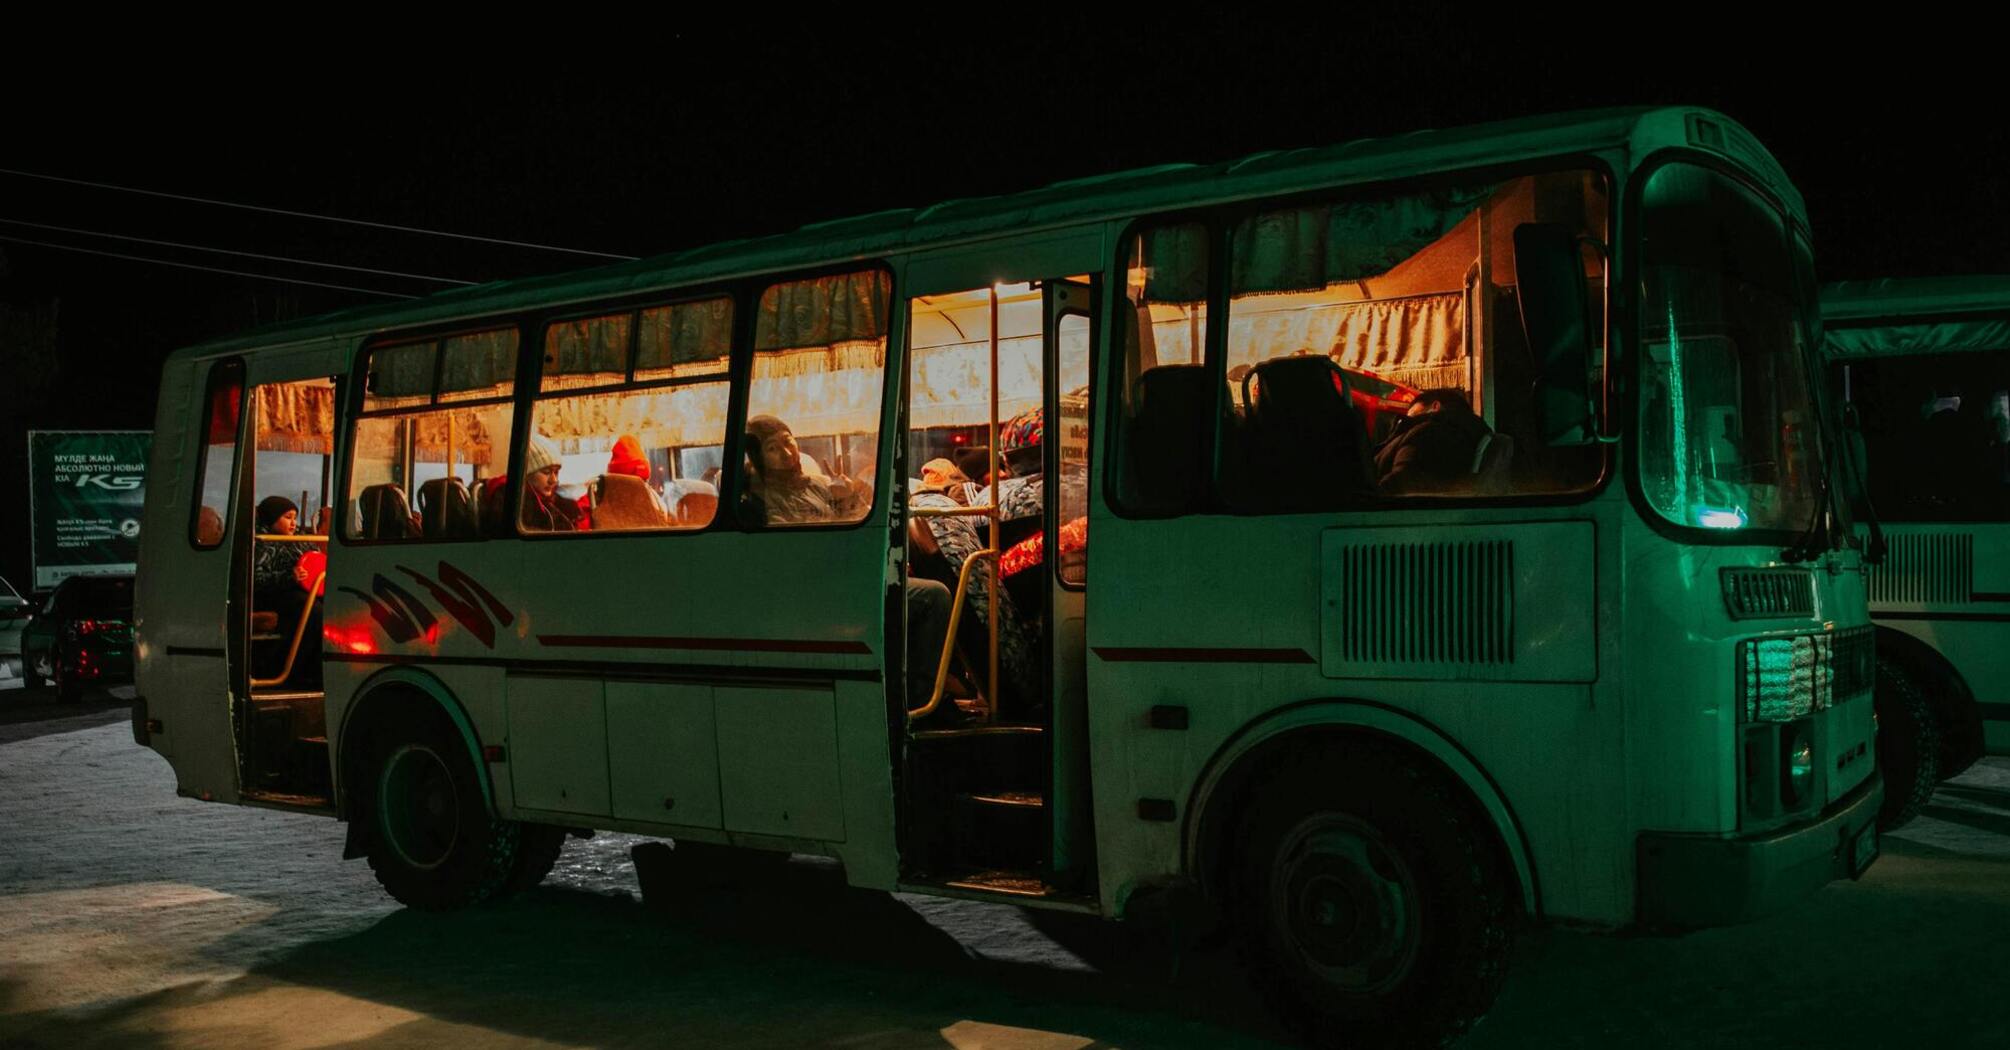 Pros and cons of traveling by bus